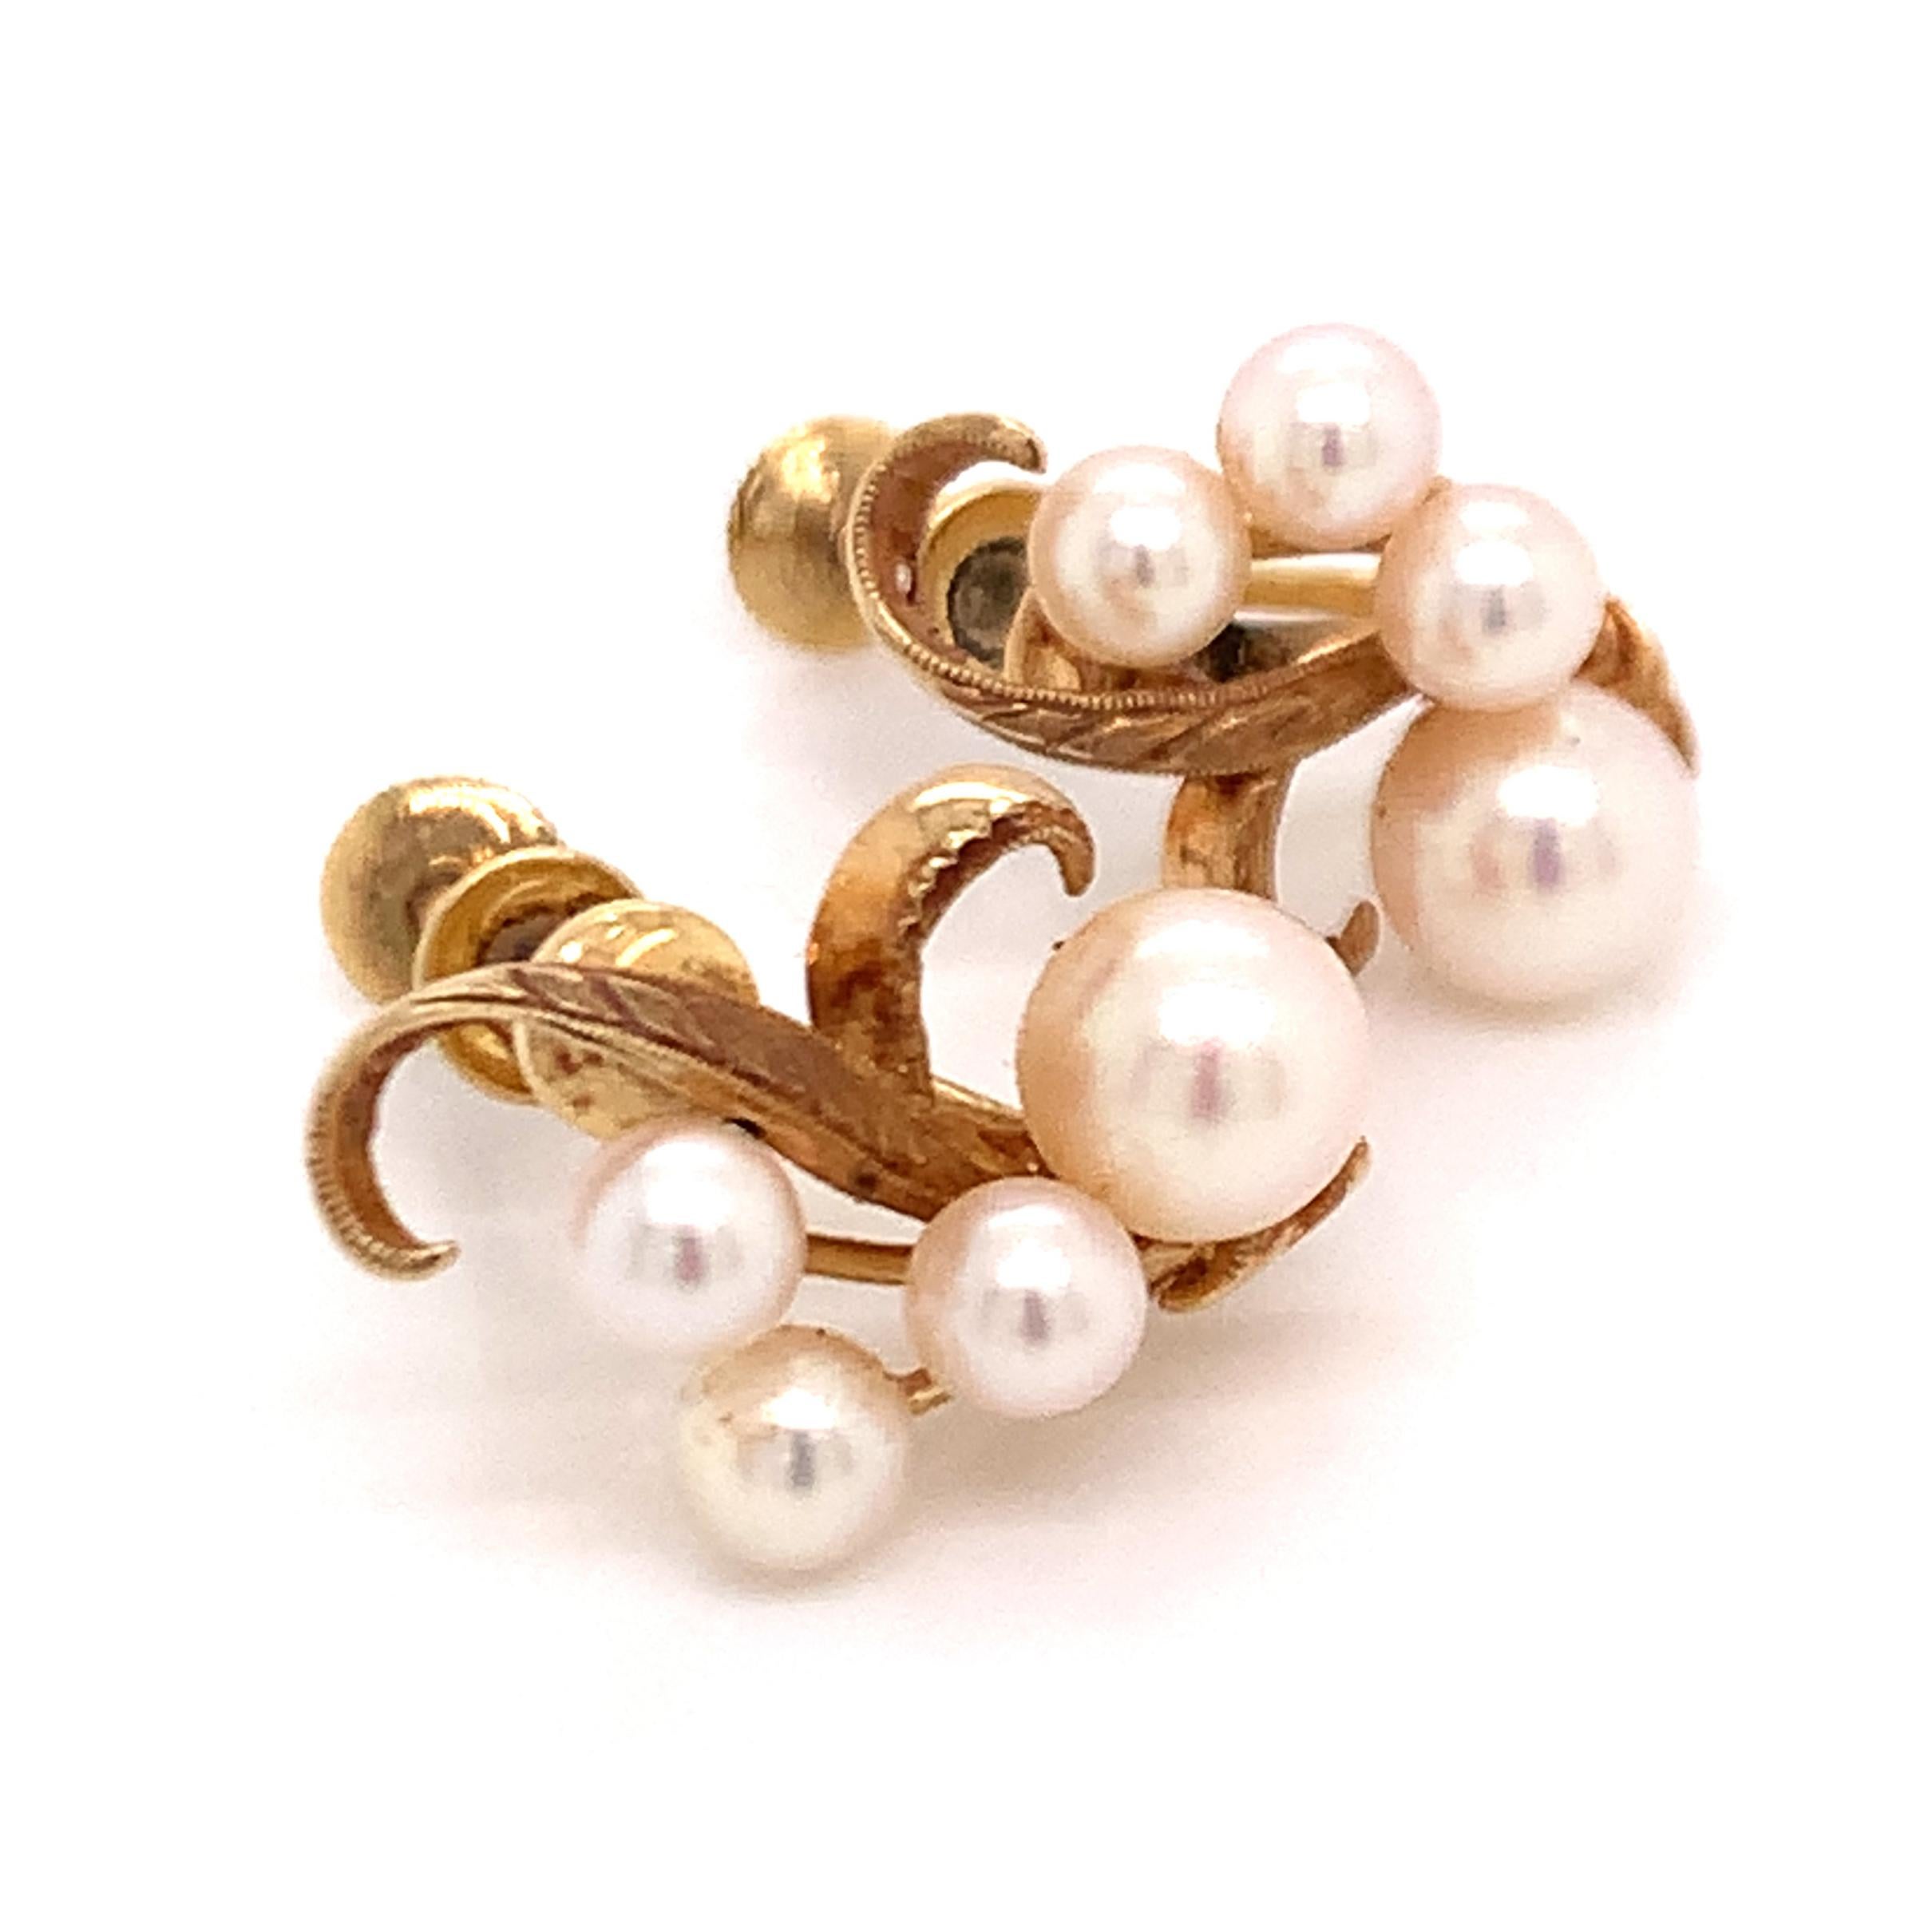 Mikimoto Estate Akoya Pearl Clip On Earrings 14k Gold 6.22 mm M176

These elegant Authentic Mikimoto Estate Akoya pearl clip-on earrings are made of 14 karats yellow gold and have 4 Akoya Cultured Pearls ranging in size from 4.14 - 6.22 mm with a